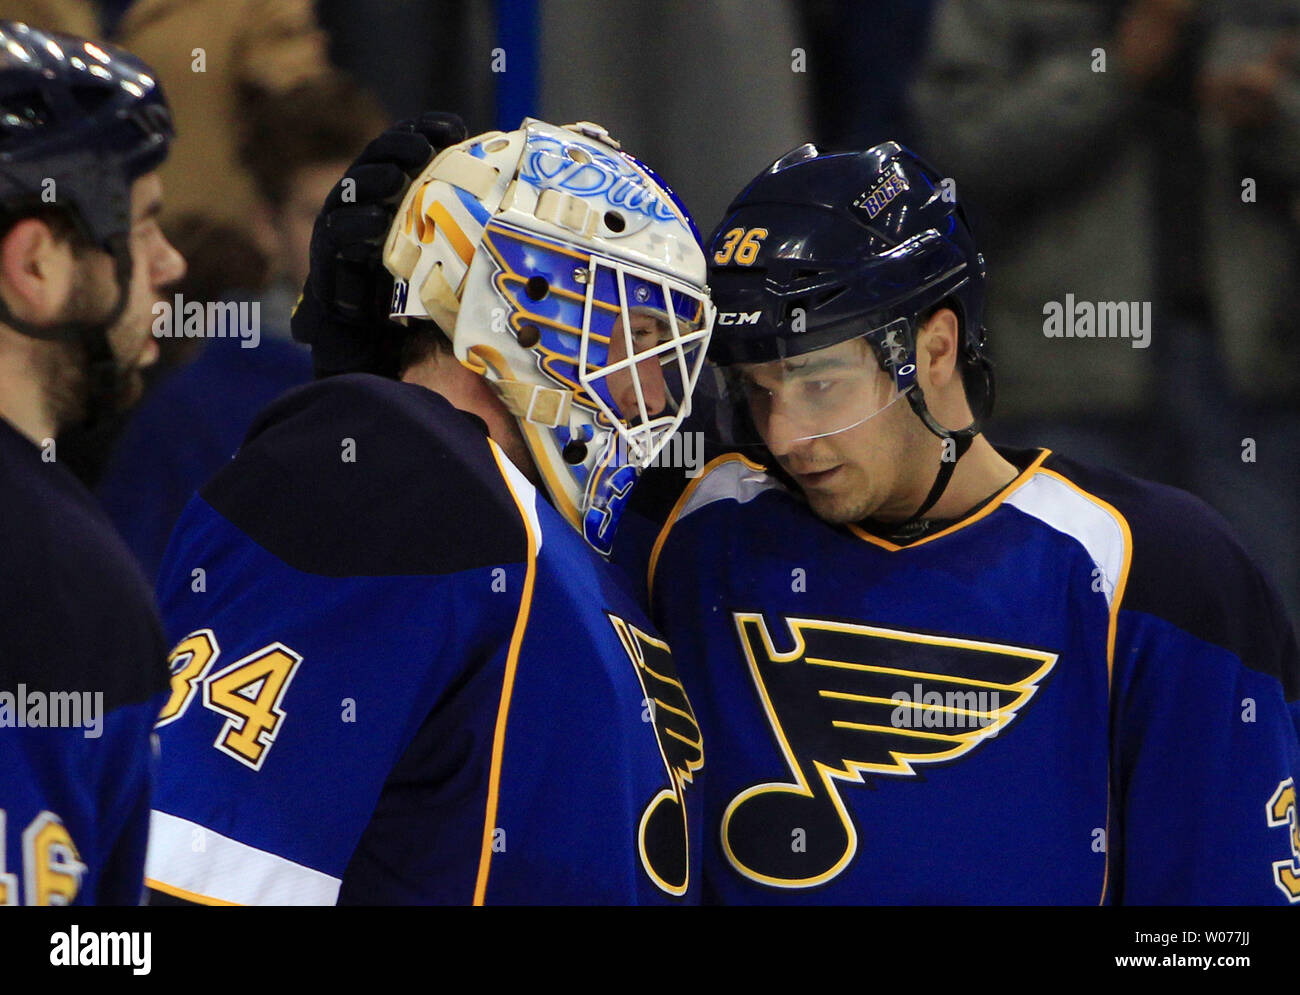 St. Louis Blues players line up to congratulate goaltender Ben Bishop after  the final horn against the Anaheim Ducks at the Scottrade Center in St.  Louis on February 19, 2011. St. Louis